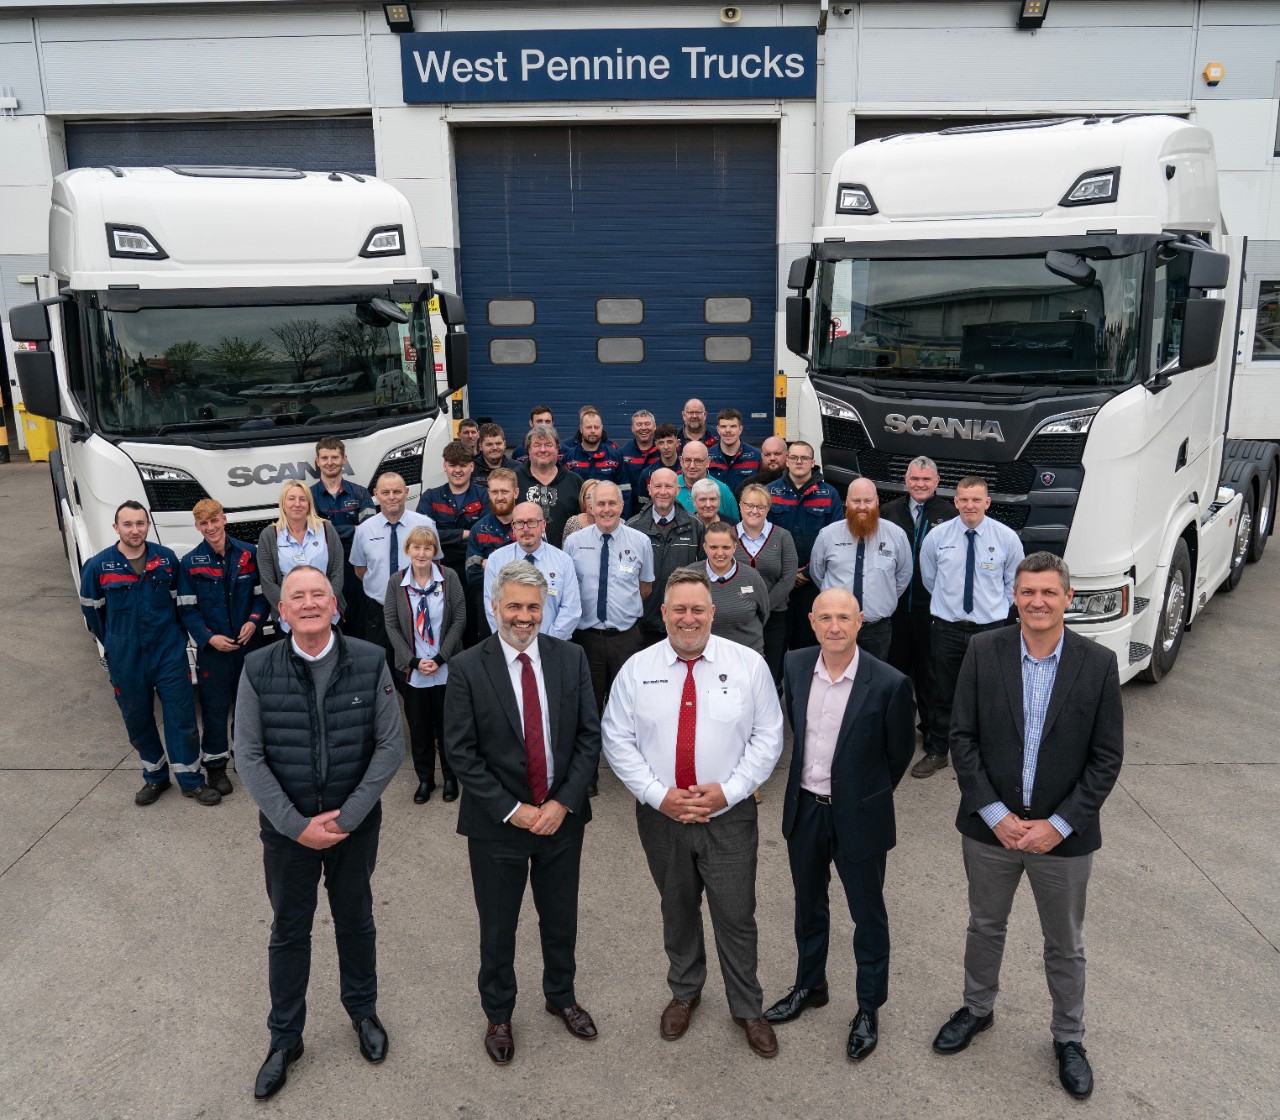 Trafford Park have won the Scania Service Team Award in 2022